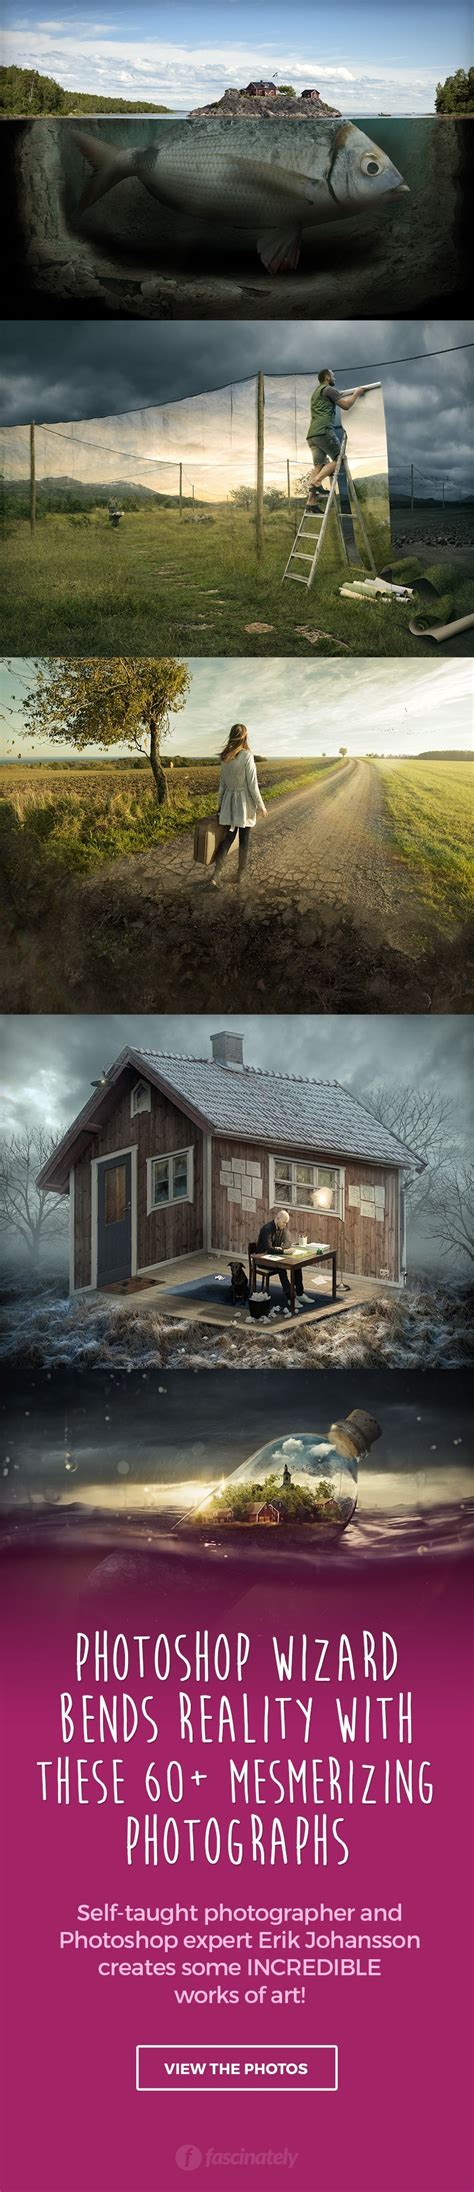 Photoshop Wizard Bends Reality With These Mesmerizing Photographs